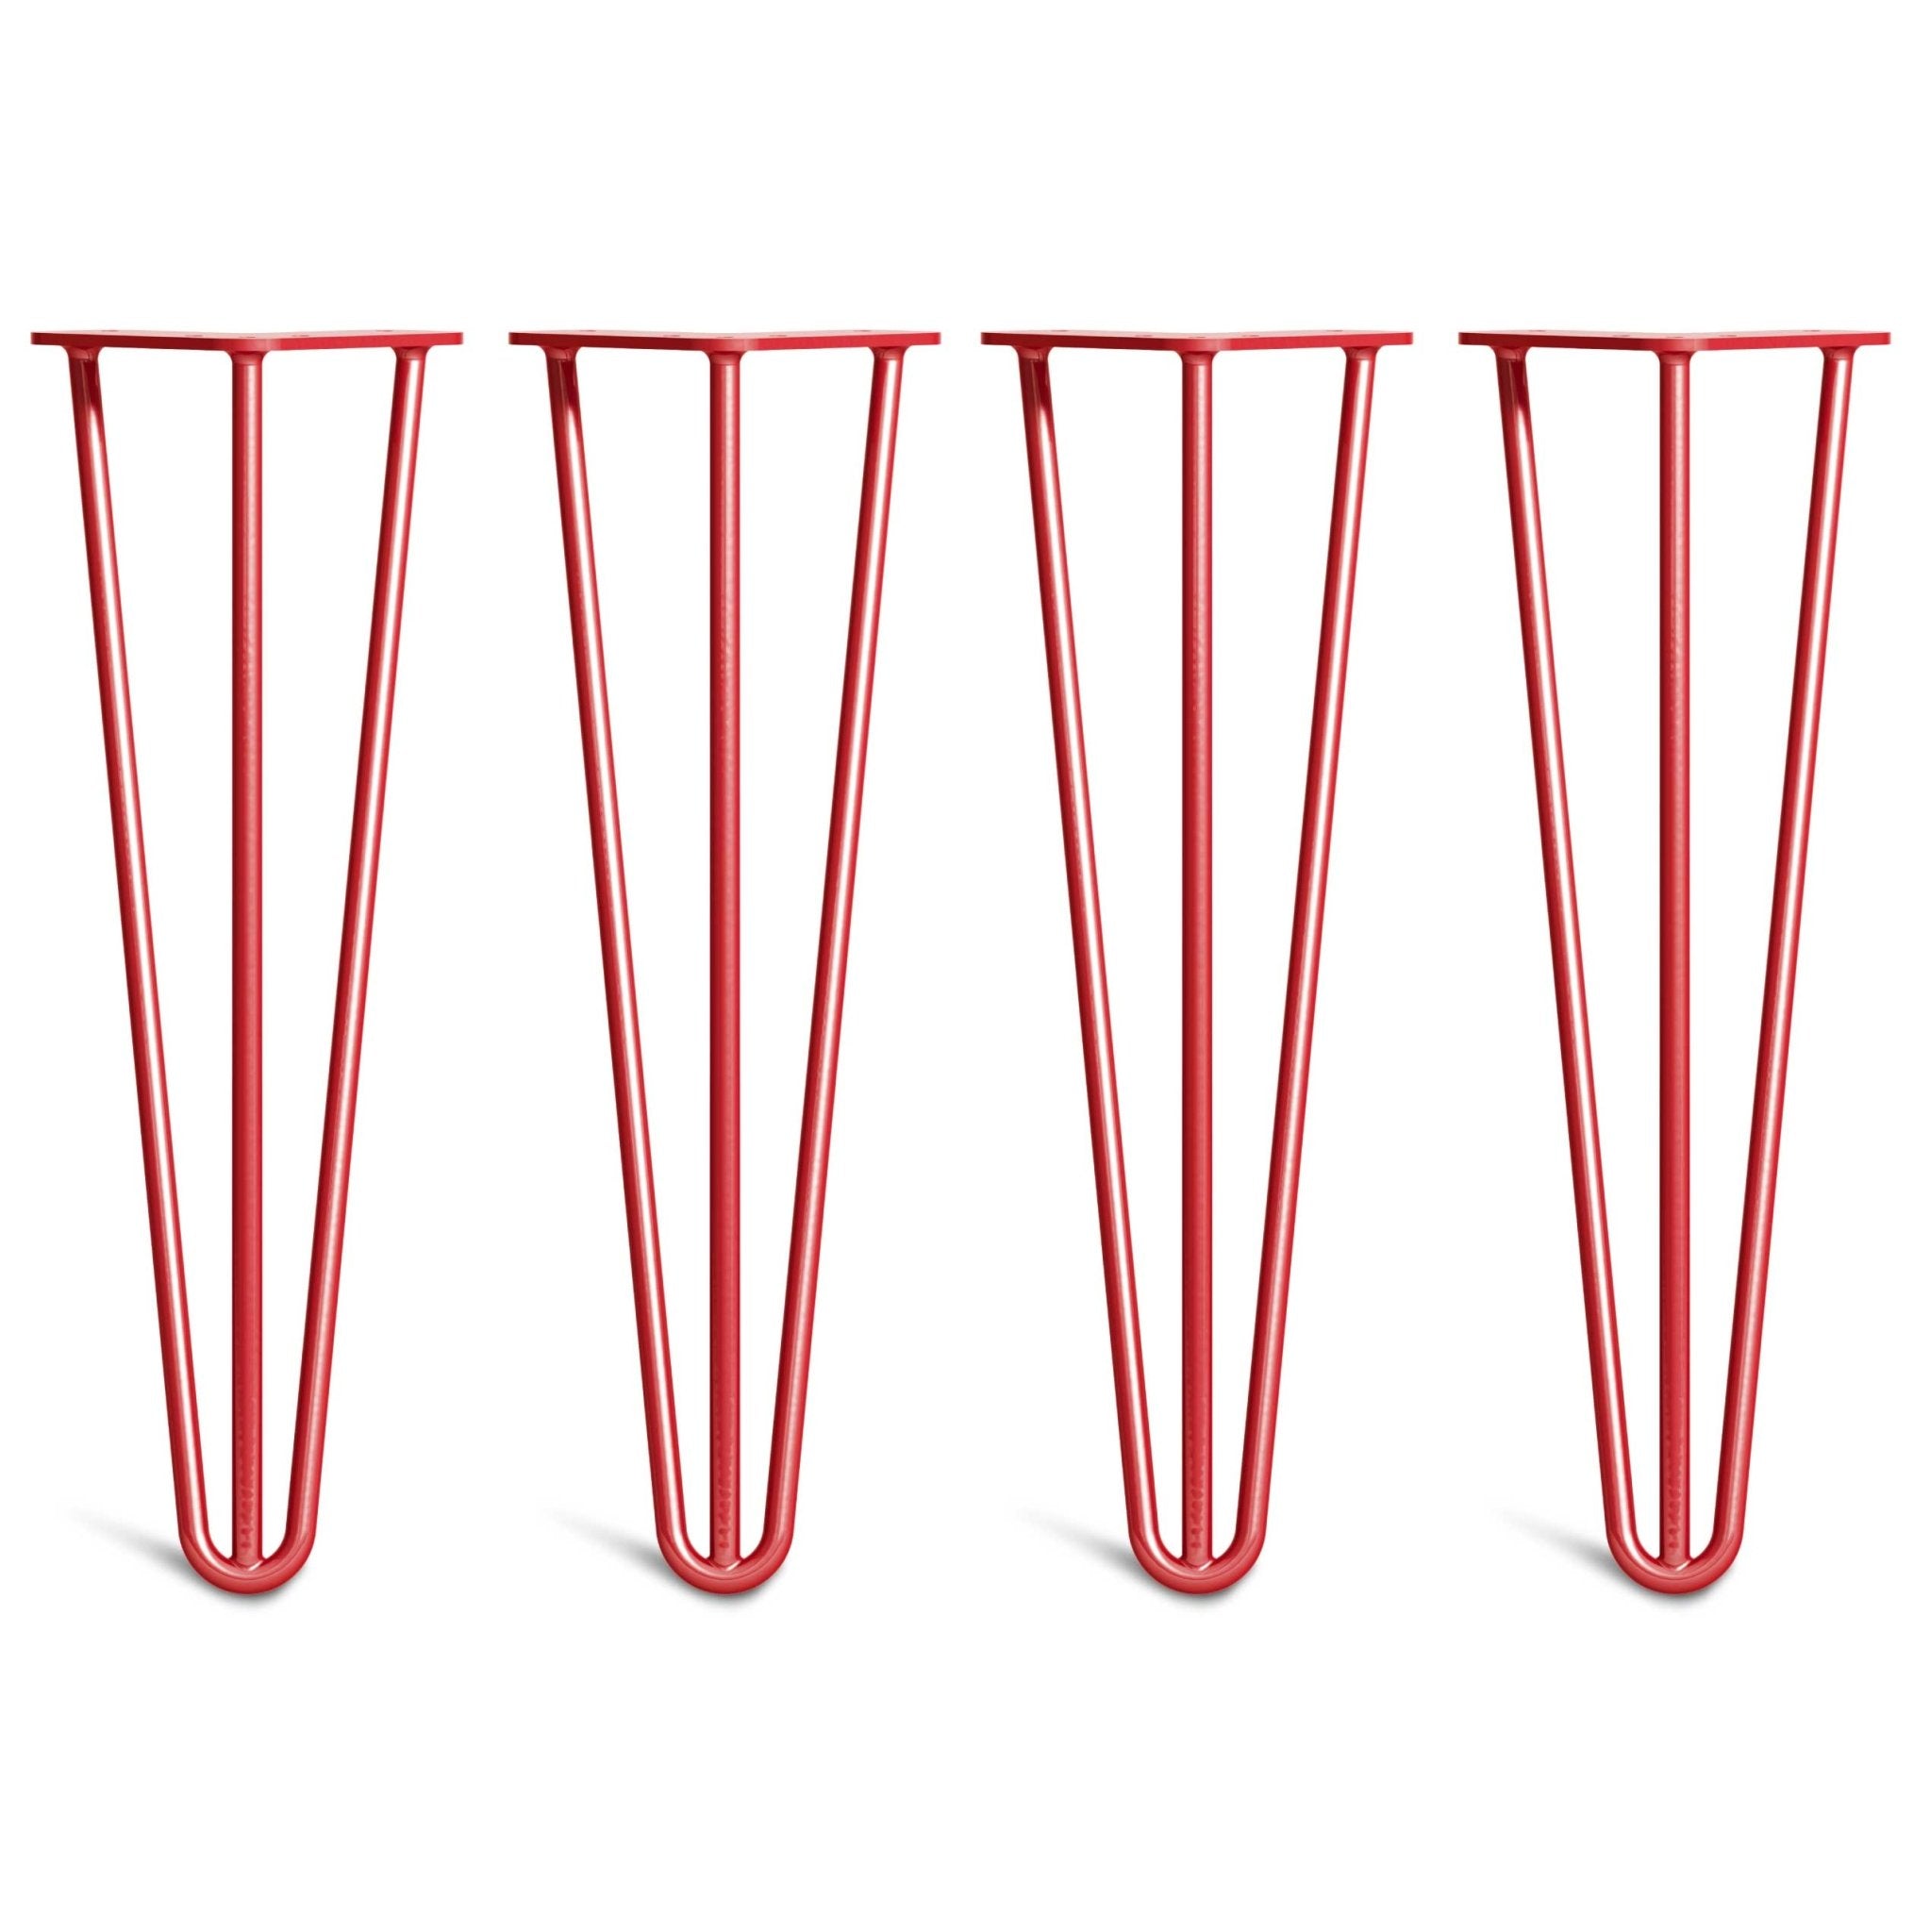 40cm Hairpin Legs - Bench-3 Rod-Red-The Hairpin Leg Co.